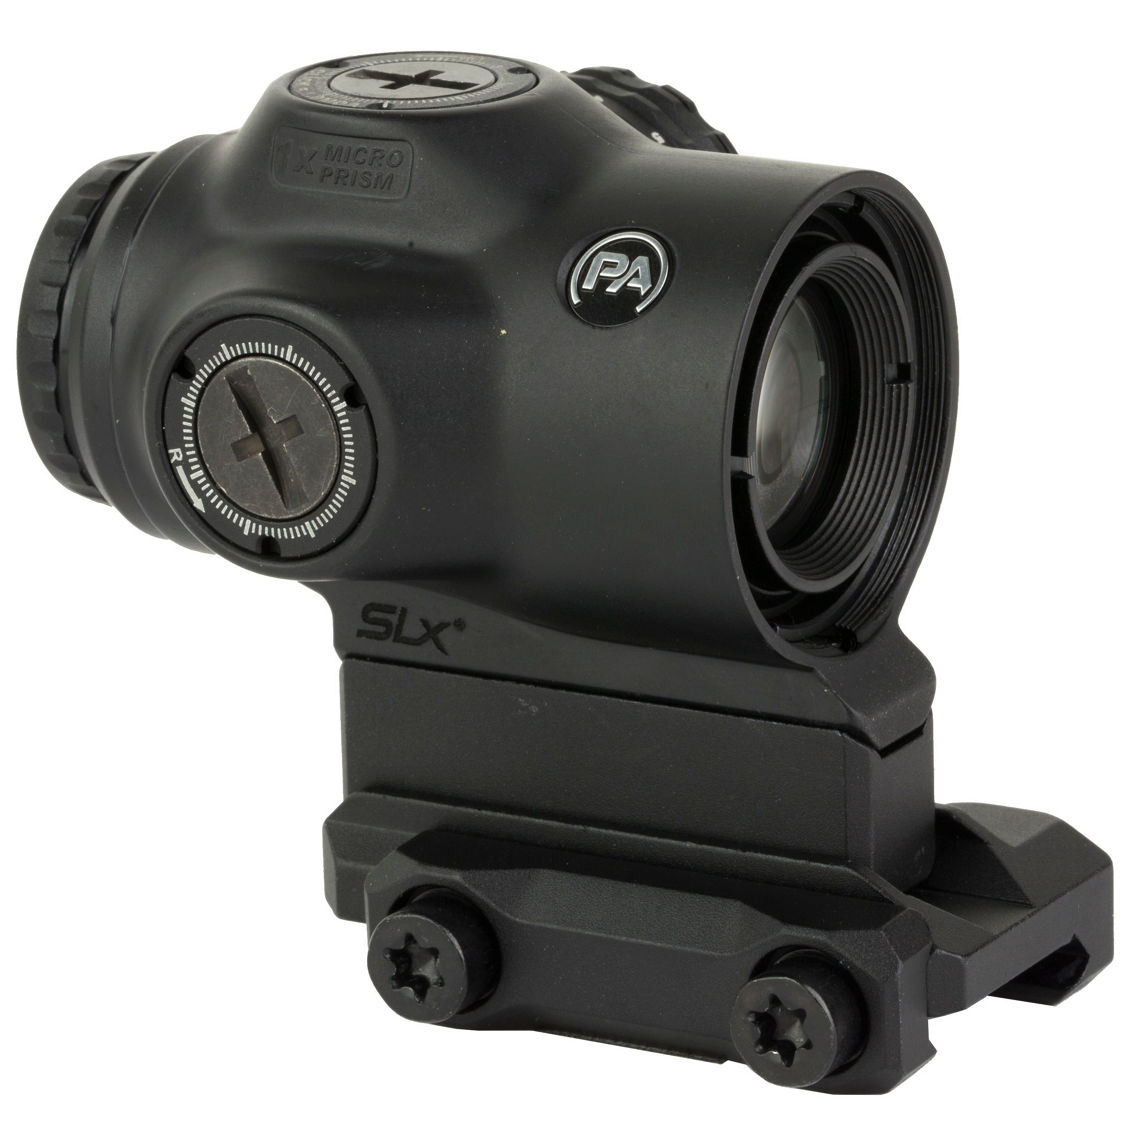 Primary Arms SLx 1x17mm Gen 2 MicroPrism Scope with Red ACSS Cyclops Reticle - Image 2 of 2